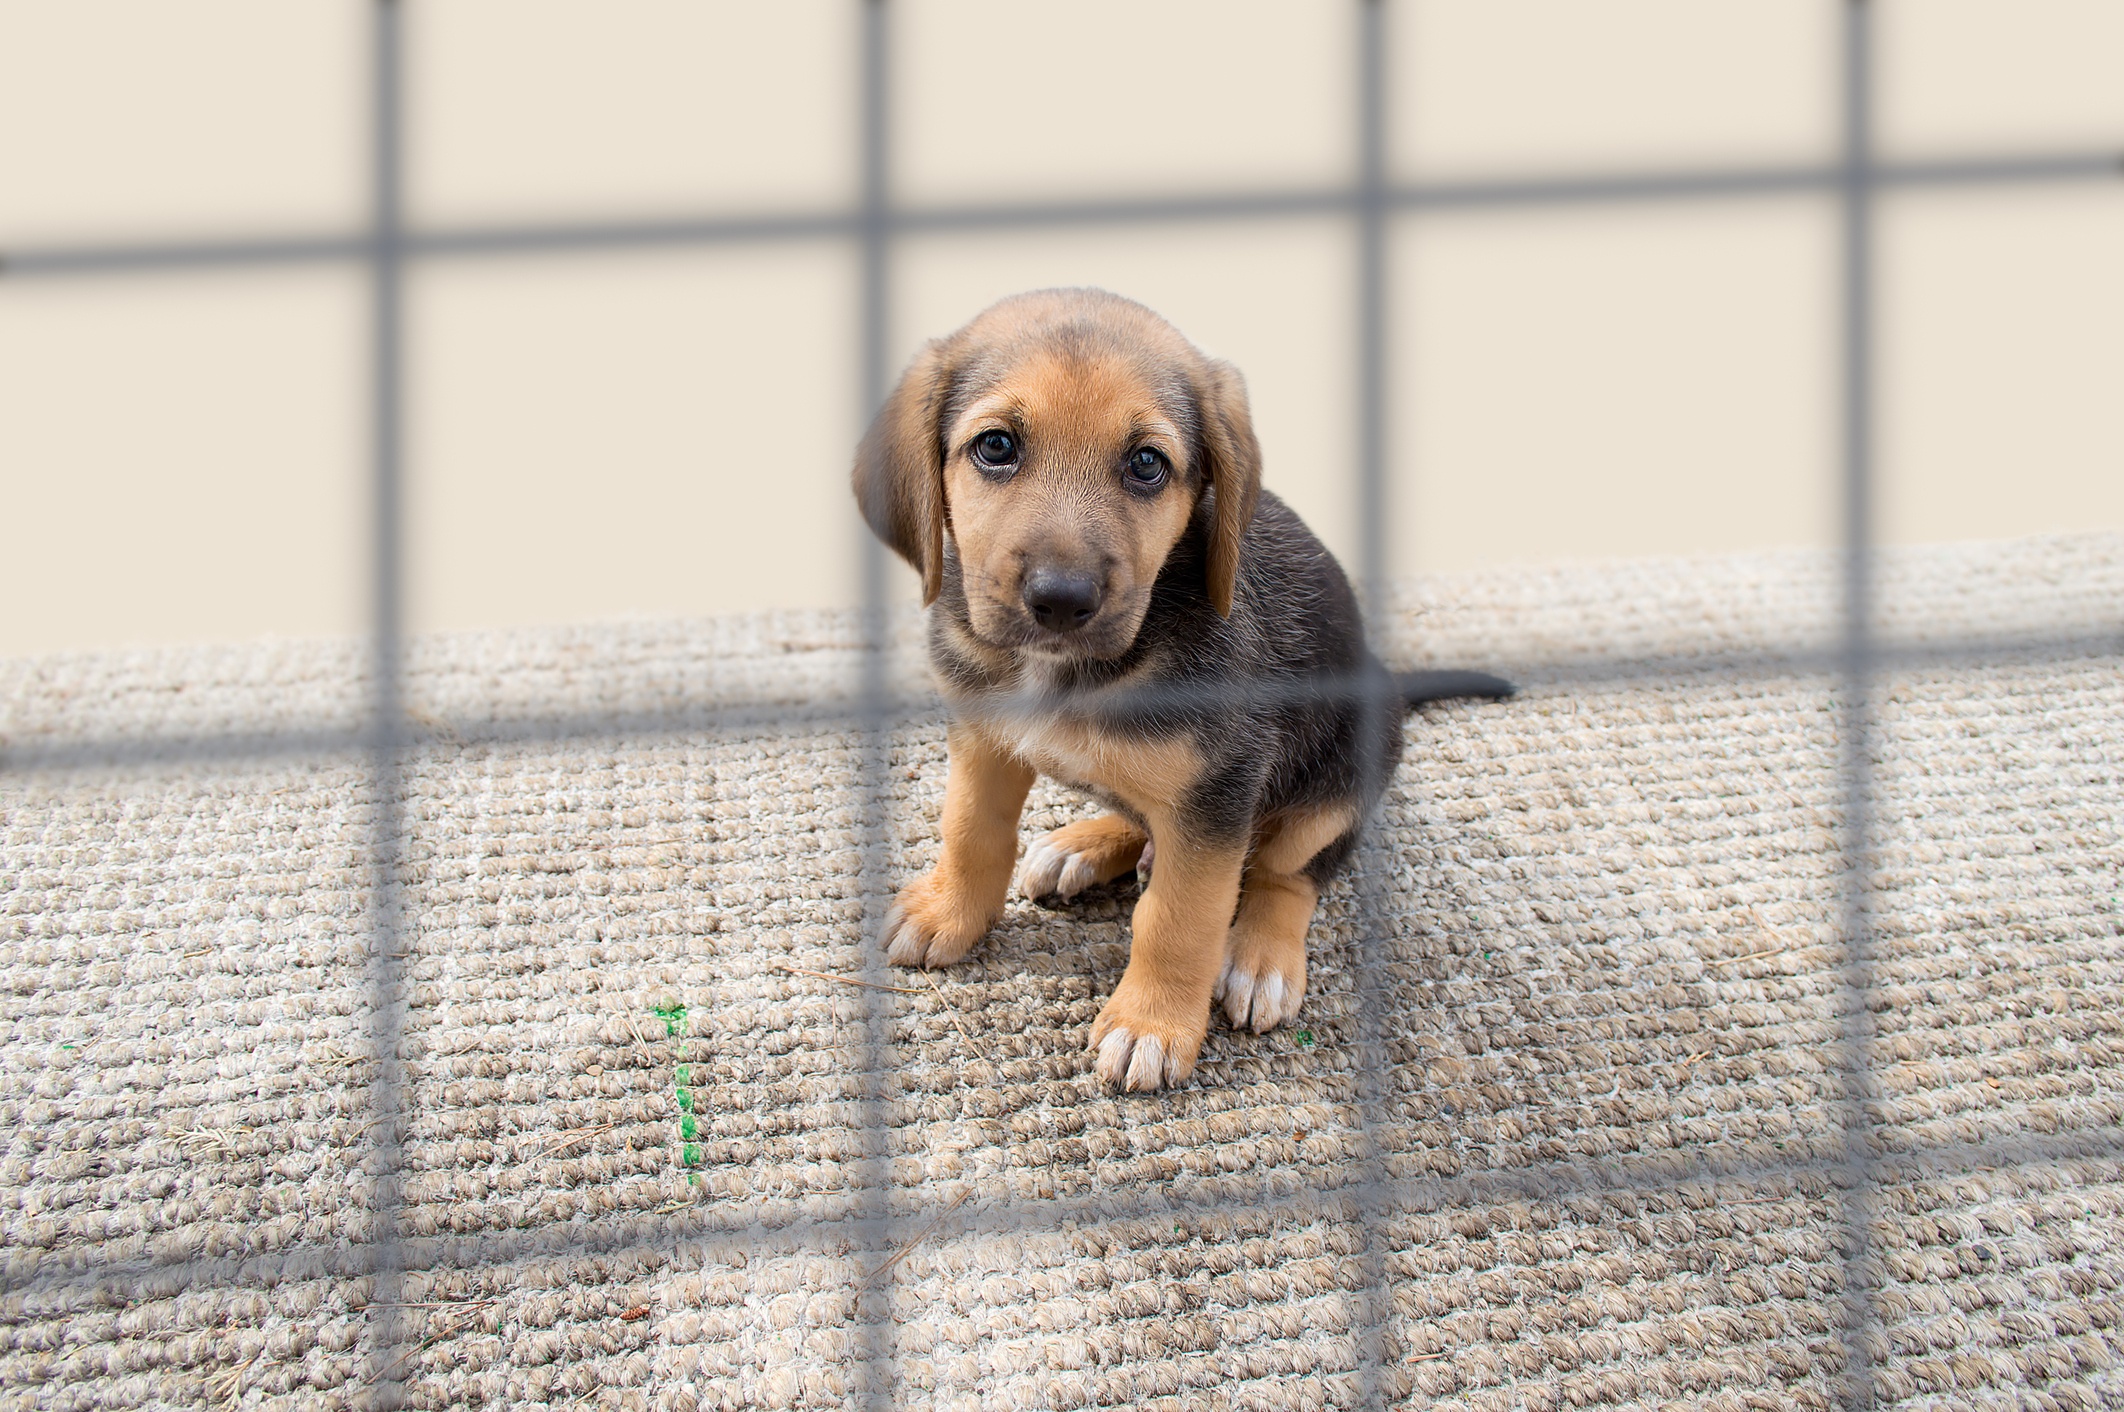 4 Tips to Tell Shelter Pets' Stories and Engage Animal Welfare Donors